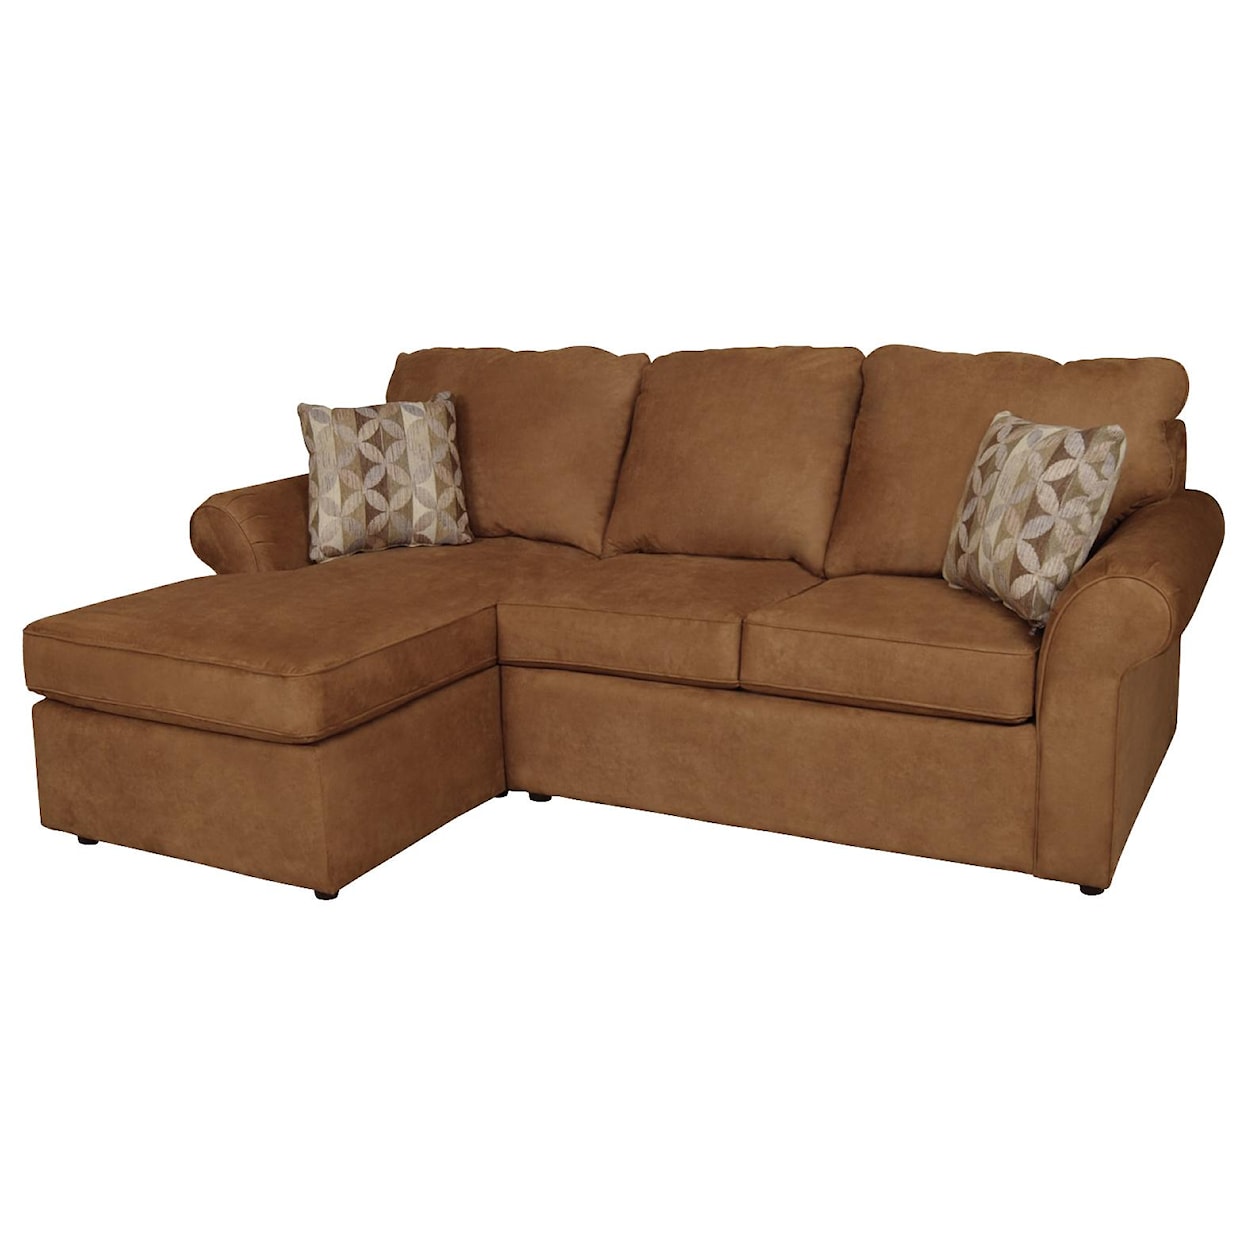 England Tansy 3 Seat (left side) Chaise Sofa